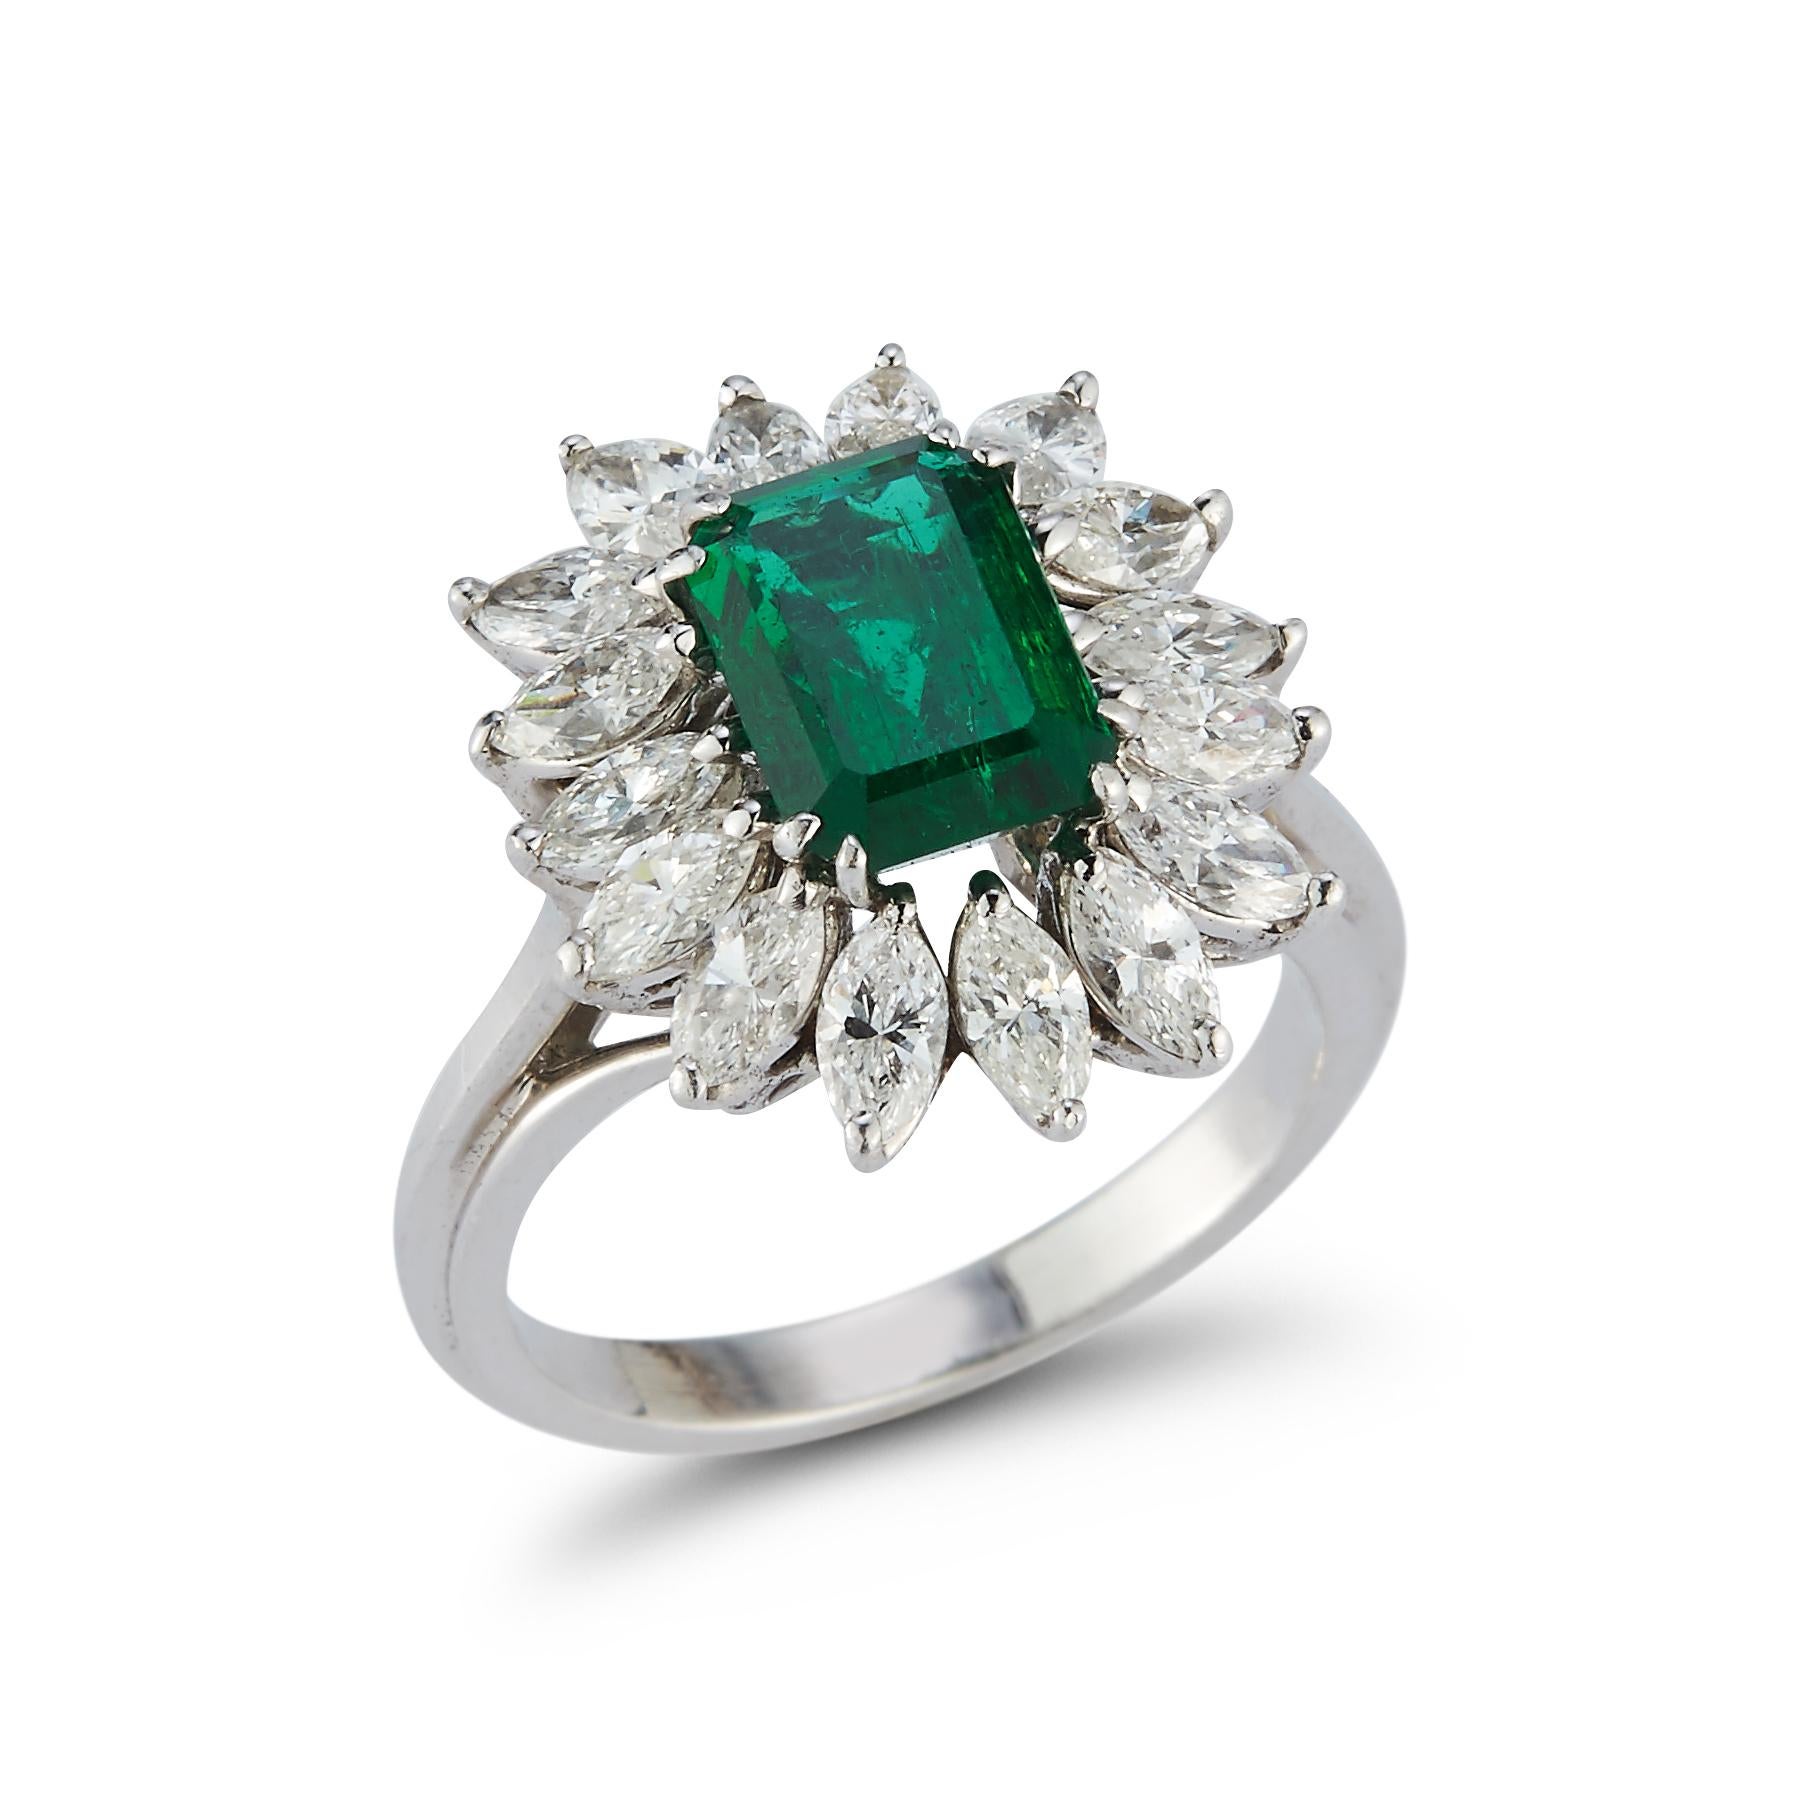 2.00 Ct Emerald Cut Emerald & Diamond Ring 1 emerald surrounded by 16 marquise cut diamonds set in platinum

Emerald Weight: approximately 2.00 cts 

Diamond Weight: approximately 1.92 cts 

Ring Size: 6

Re sizable free of charge 

